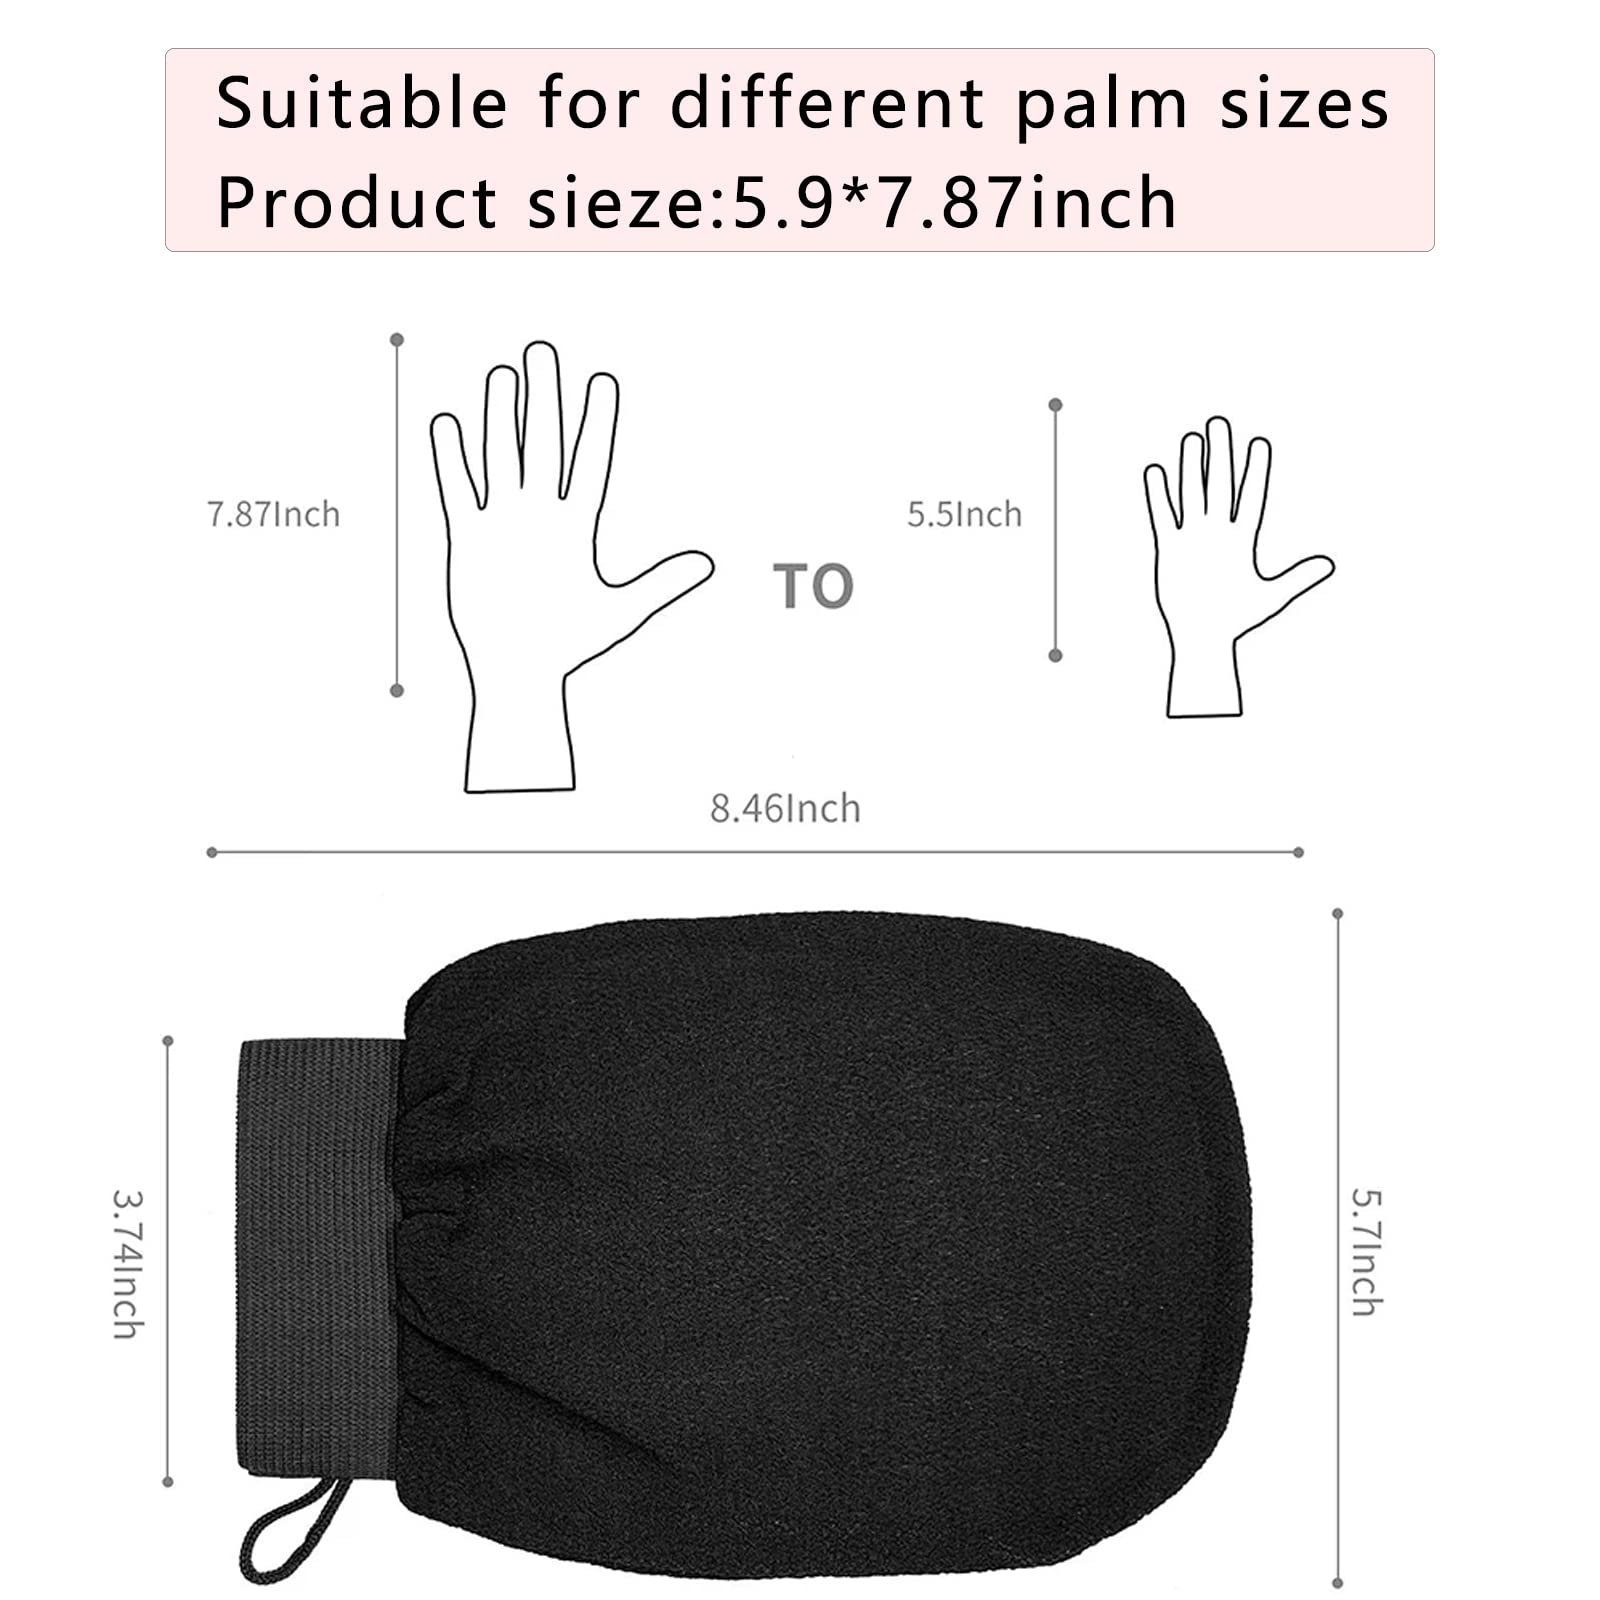 Exfoliating Glove 2pcs - Pink - Removes Unwanted Dead Skin, Exfoliating Gloves for Bath or Shower,Exfoliating Mitts at Home,Made of 100% Viscose Fibe